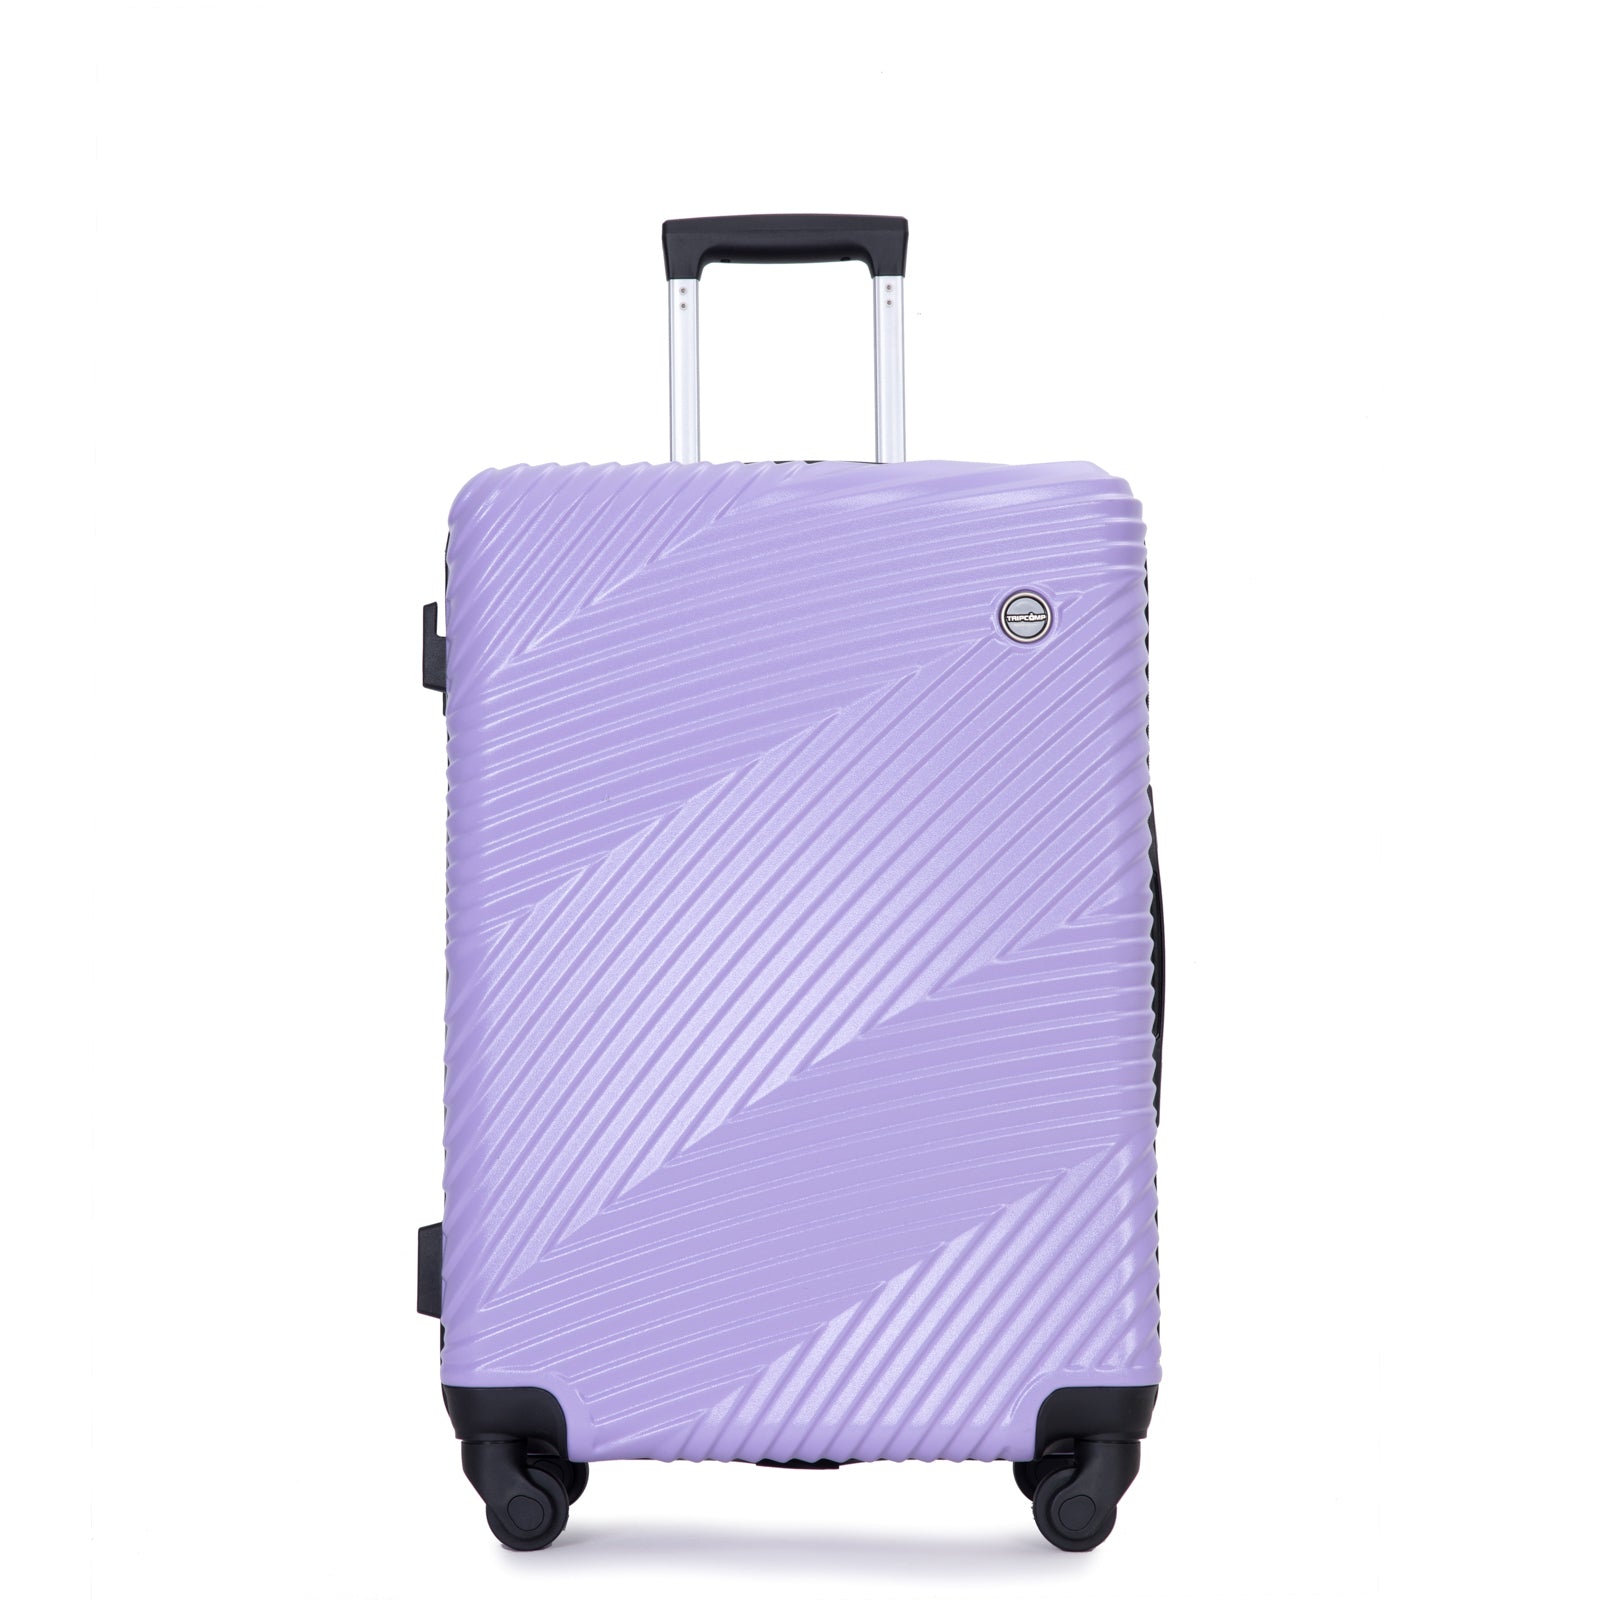 3 Piece Luggage Sets PC ABS Lightweight Suitcase with light purple-abs+pc